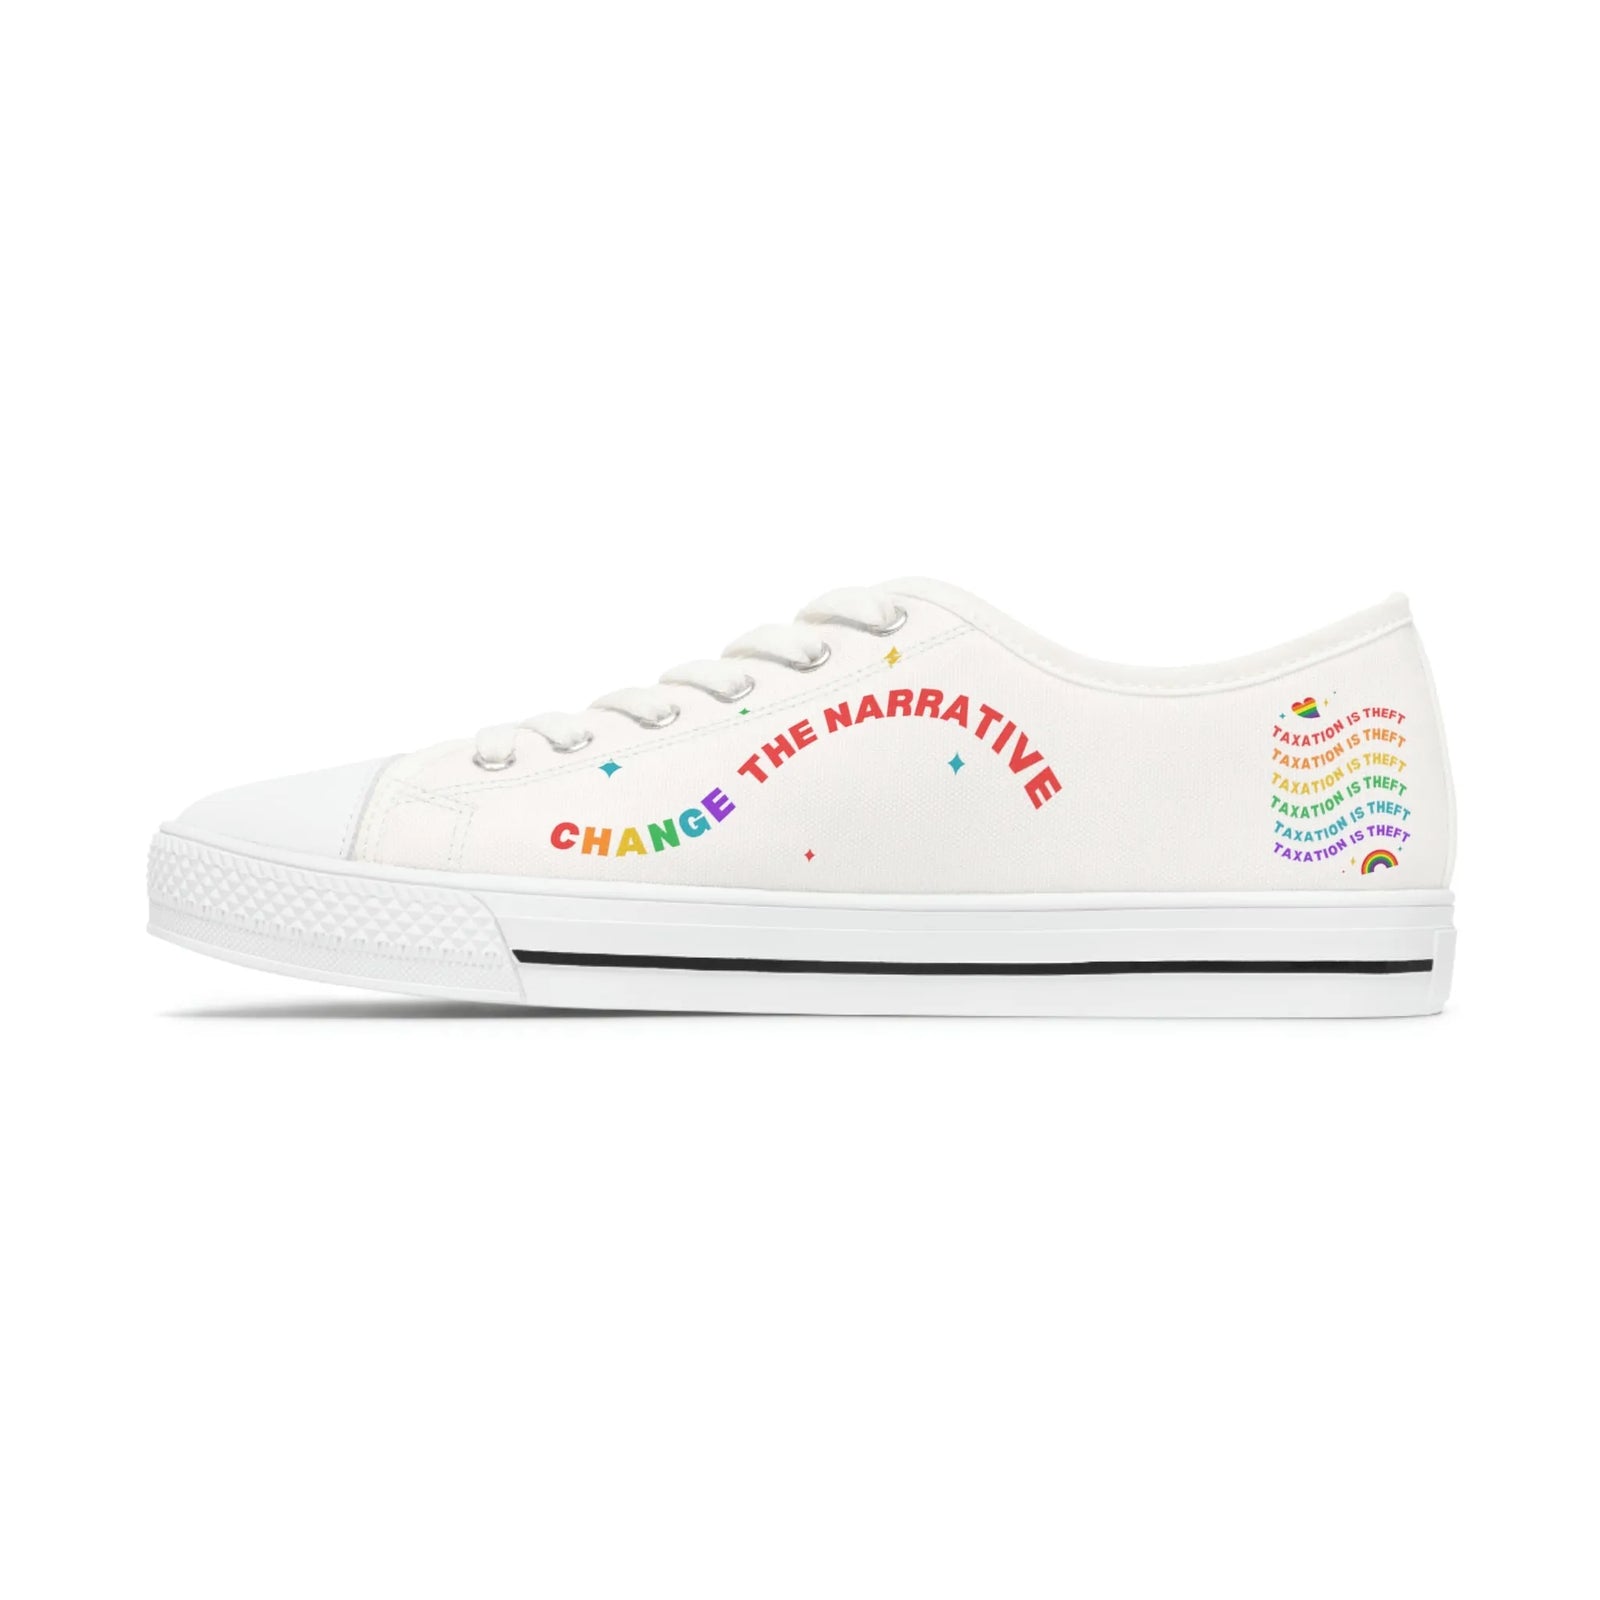 Thought Criminal Women's Low Top Sneakers